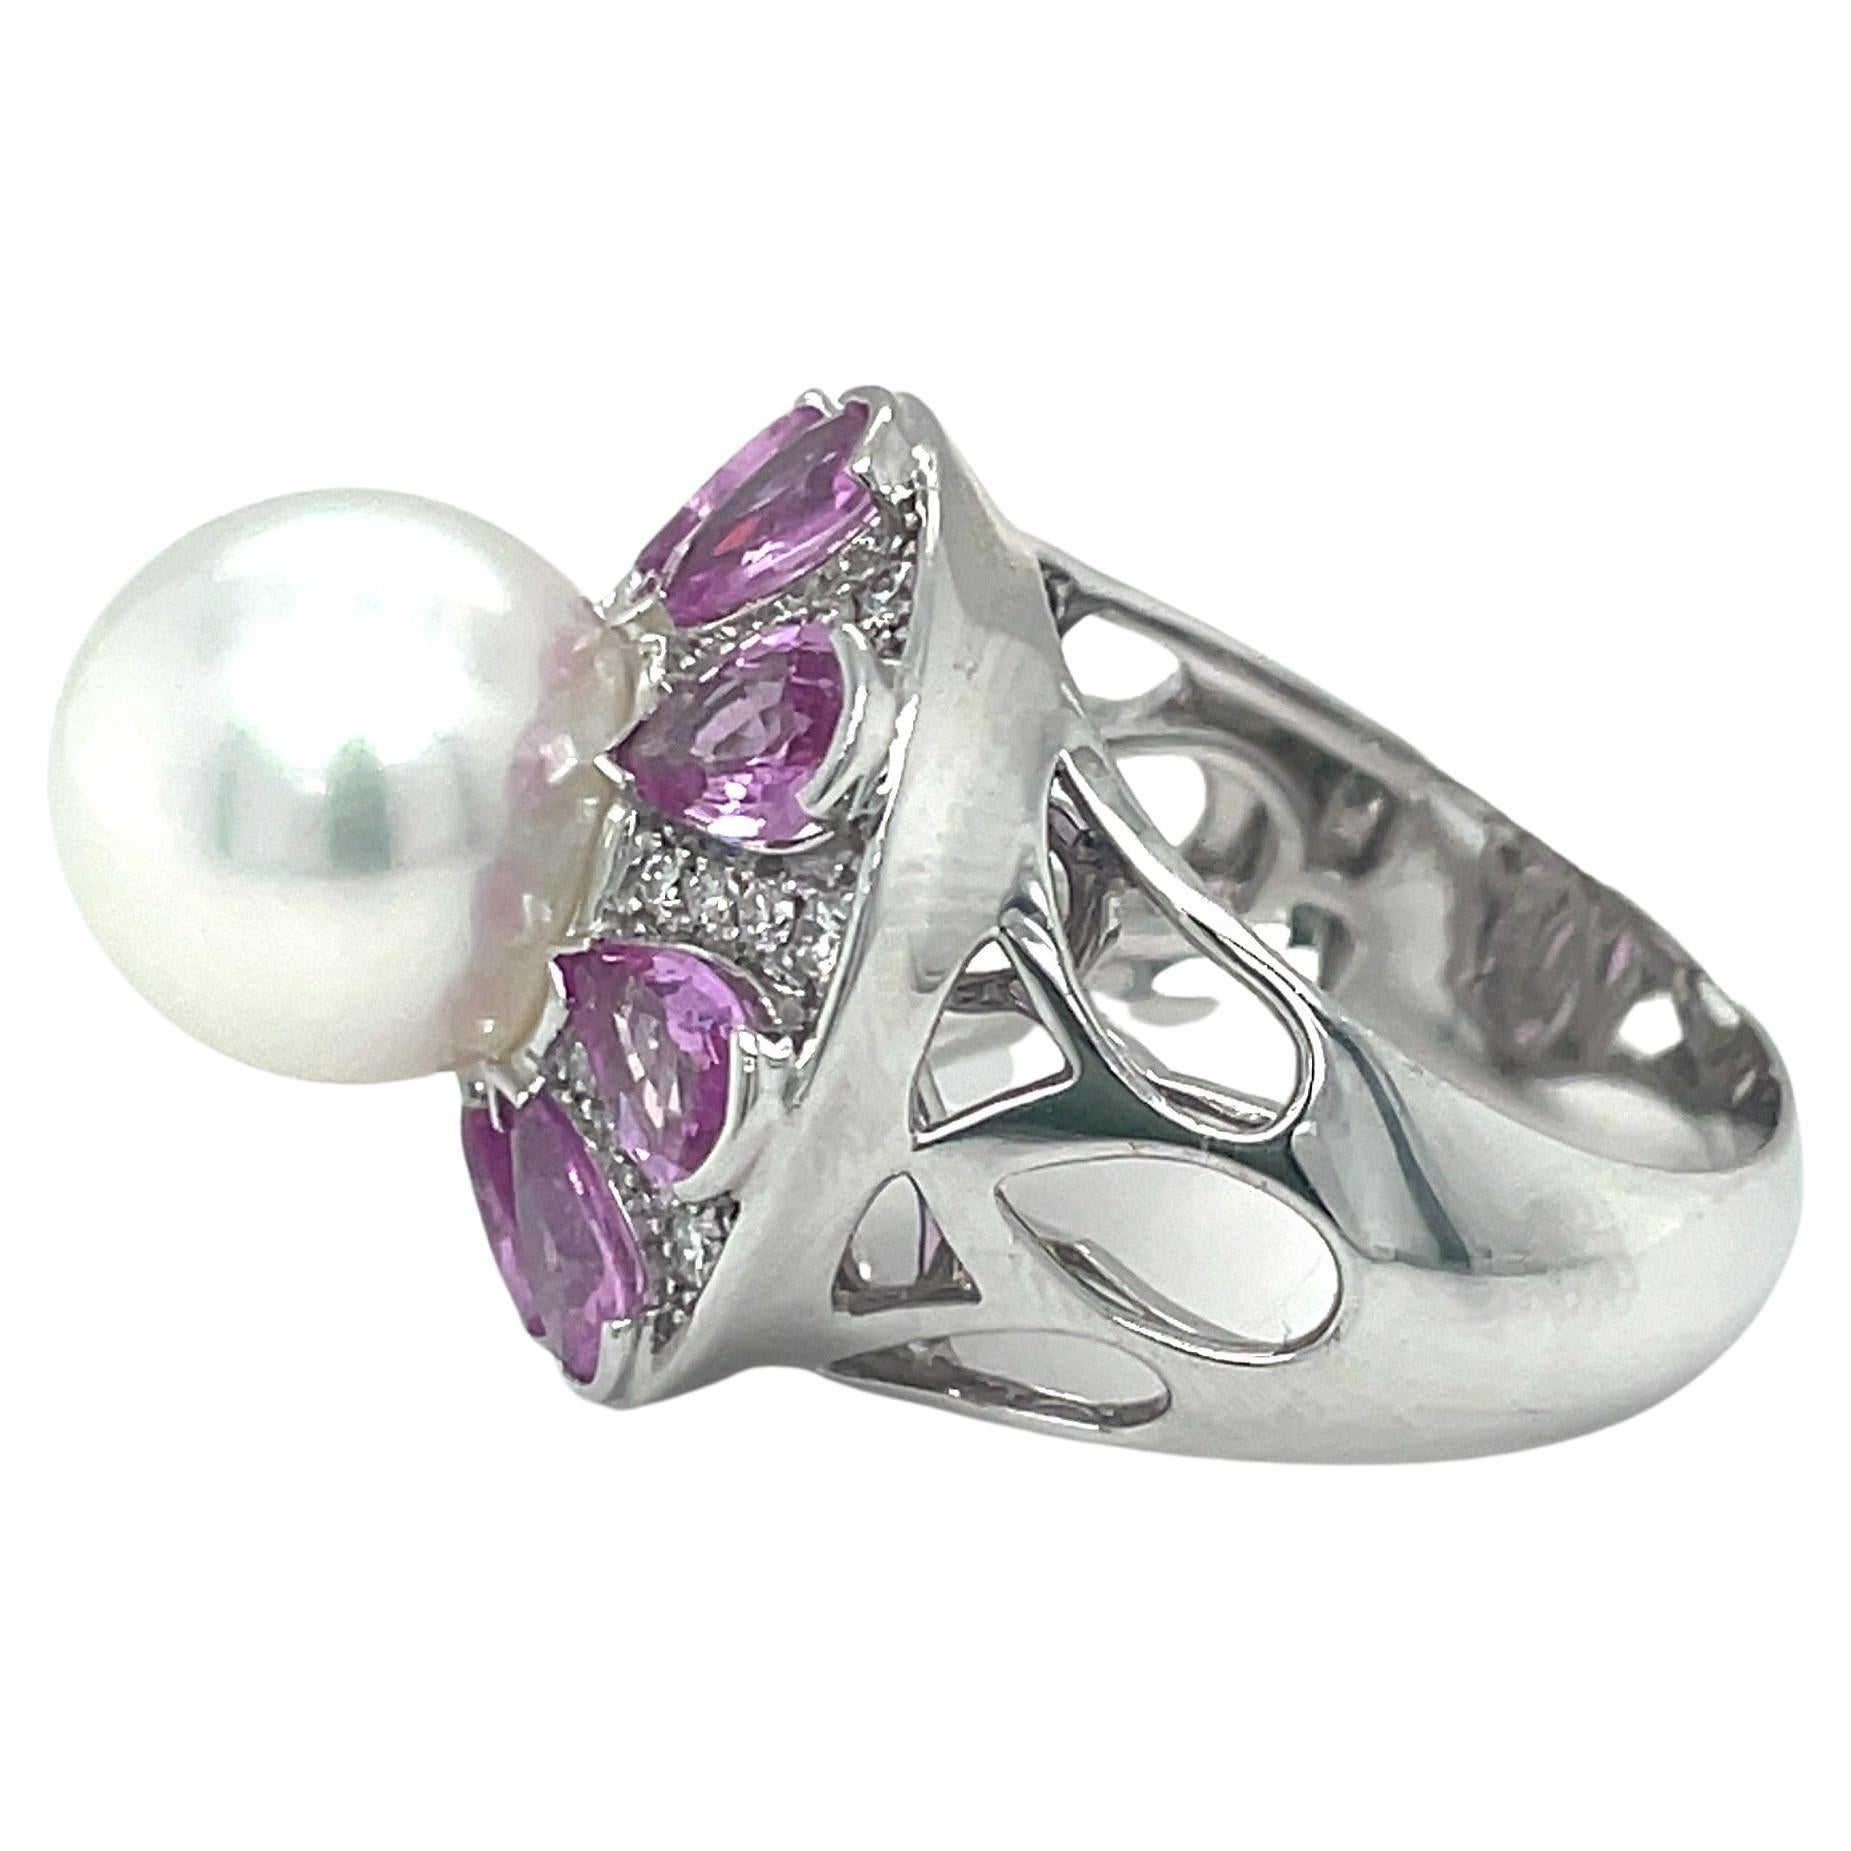 AAA grade cultured South Sea Pearl, round rose pink on silver white in color with a high cluster. Mounted in 18ct white gold and surrounded by pink pear shape sapphires and diamonds. 

Pearl - 11mm near round 
8 pear shaped sapphires = 3.50ct
64